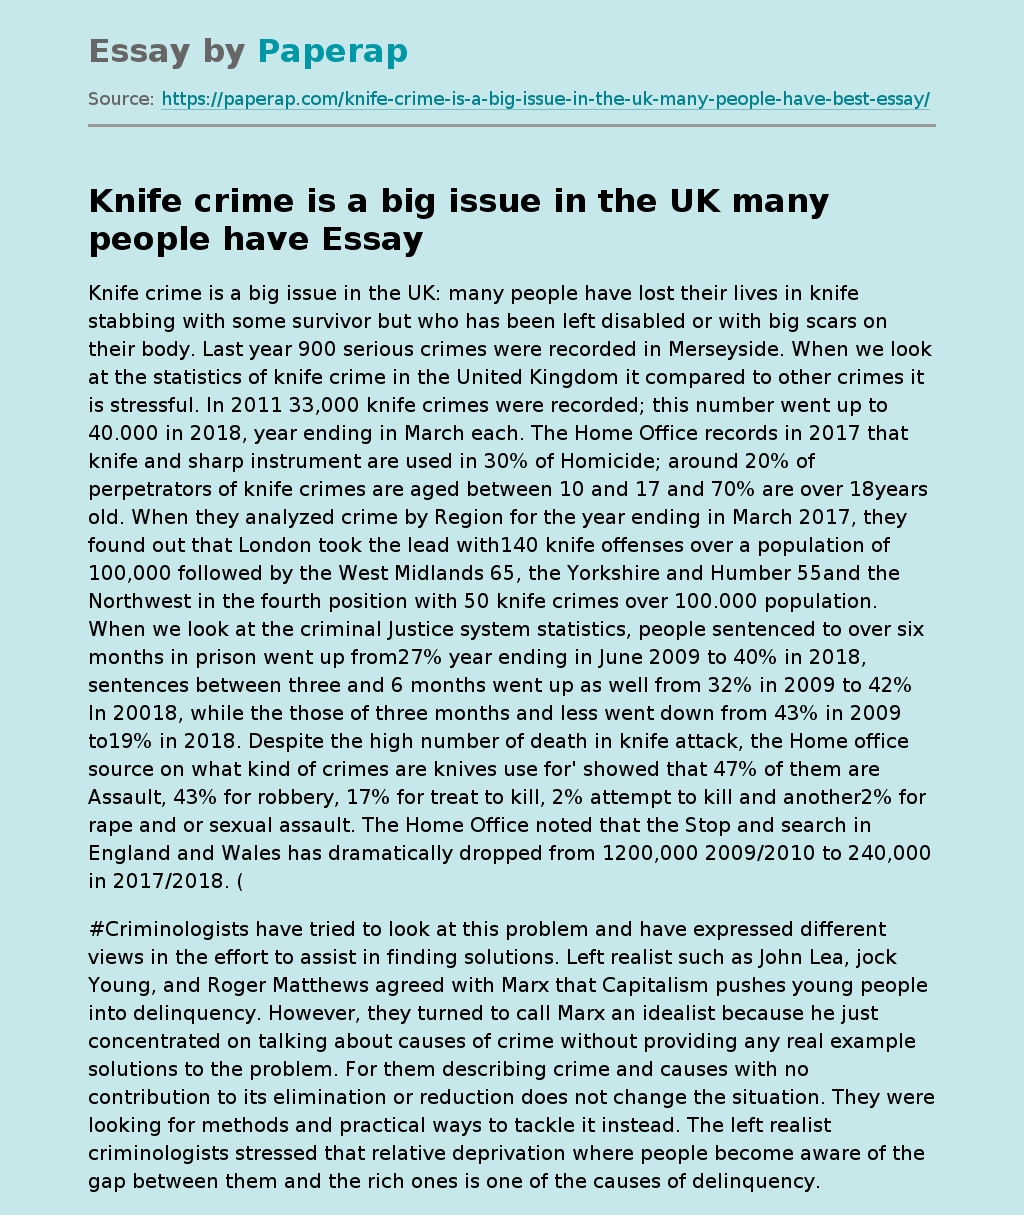 Knife Crime Is a Big Problem in the UK